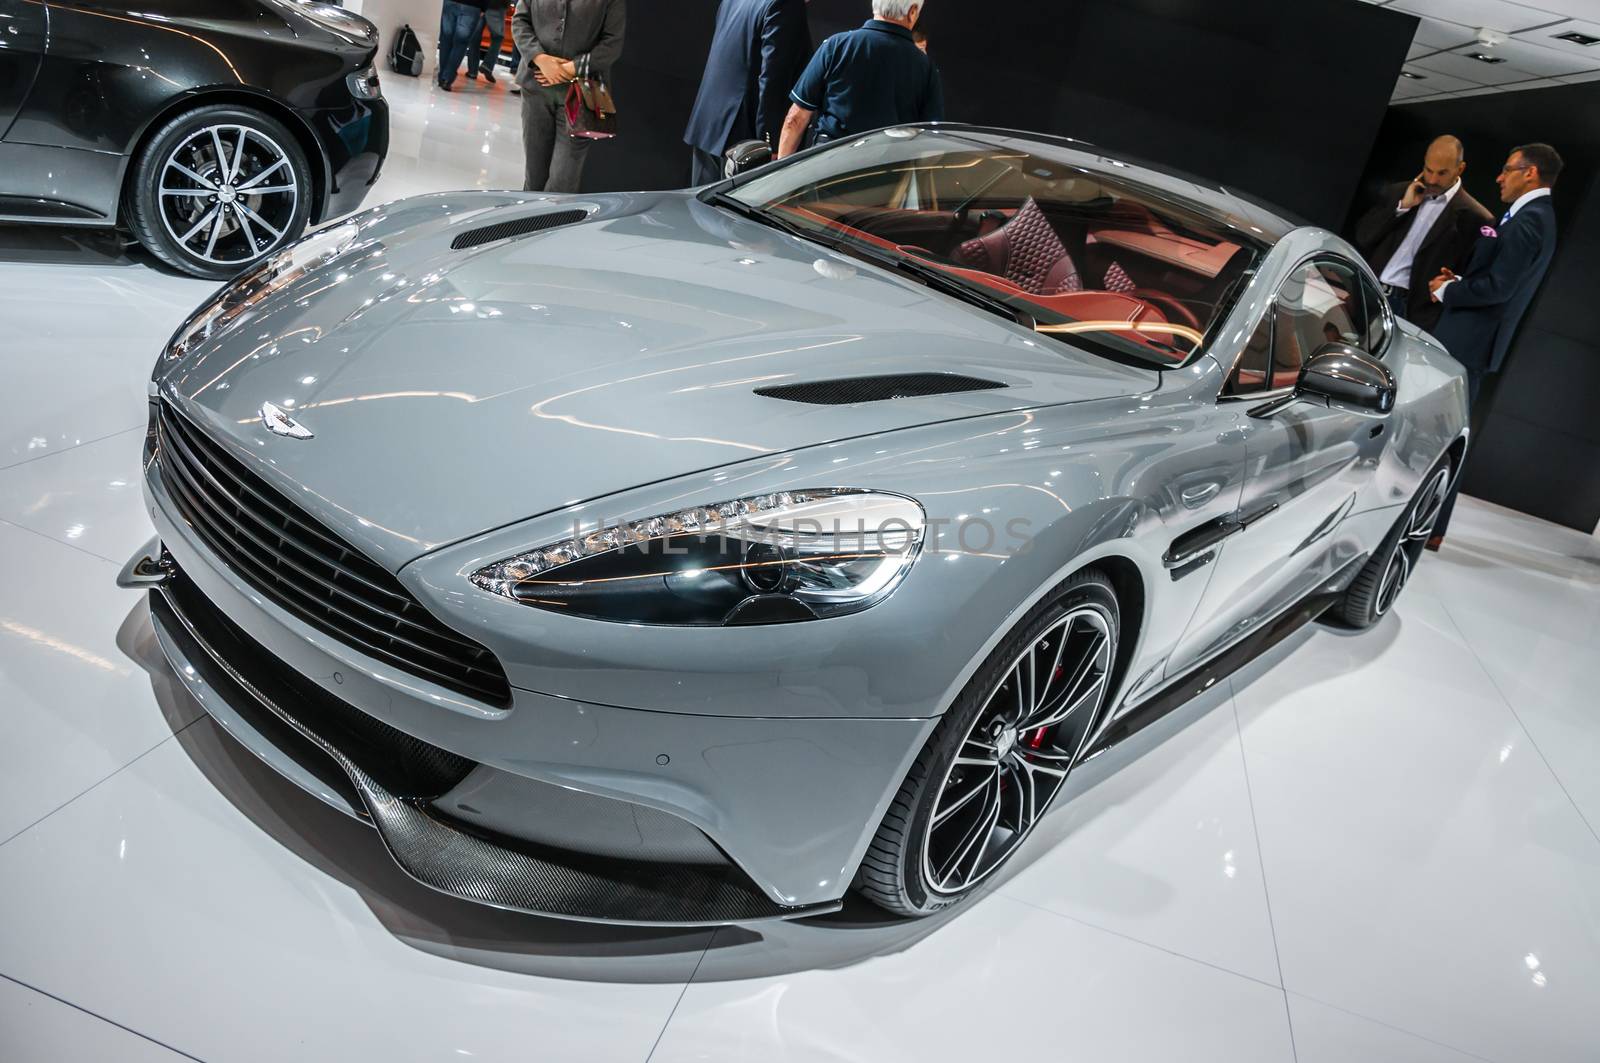 FRANKFURT - SEPT 21: Aston Martin Vanquish Coupe presented as world premiere at the 65th IAA (Internationale Automobil Ausstellung) on September 21, 2013 in Frankfurt, Germany